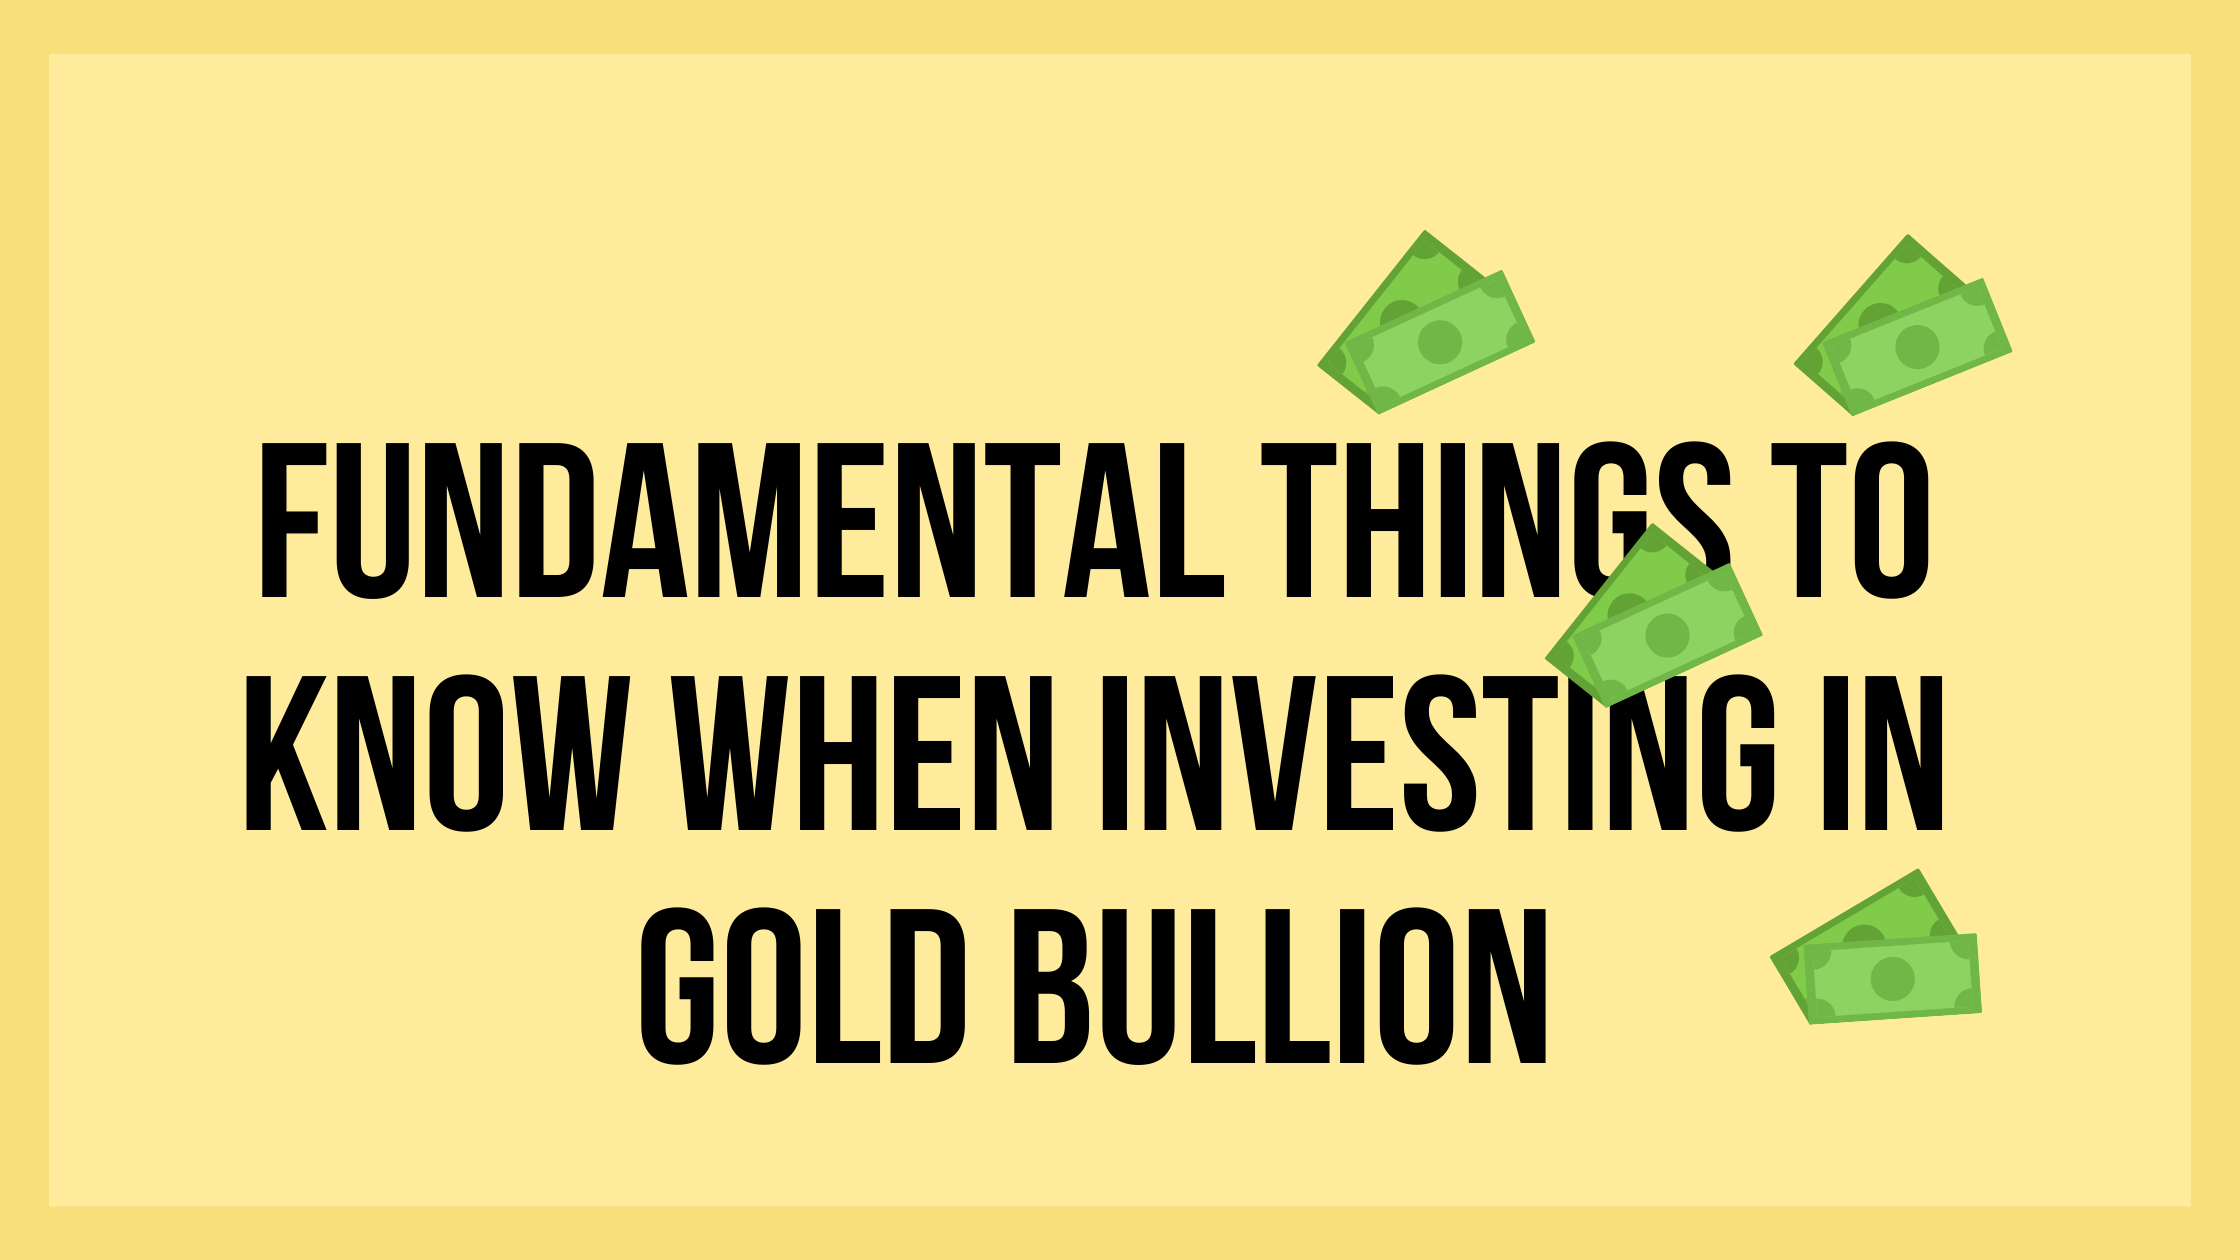 Fundamental Things to Know When Investing in Gold Bullion